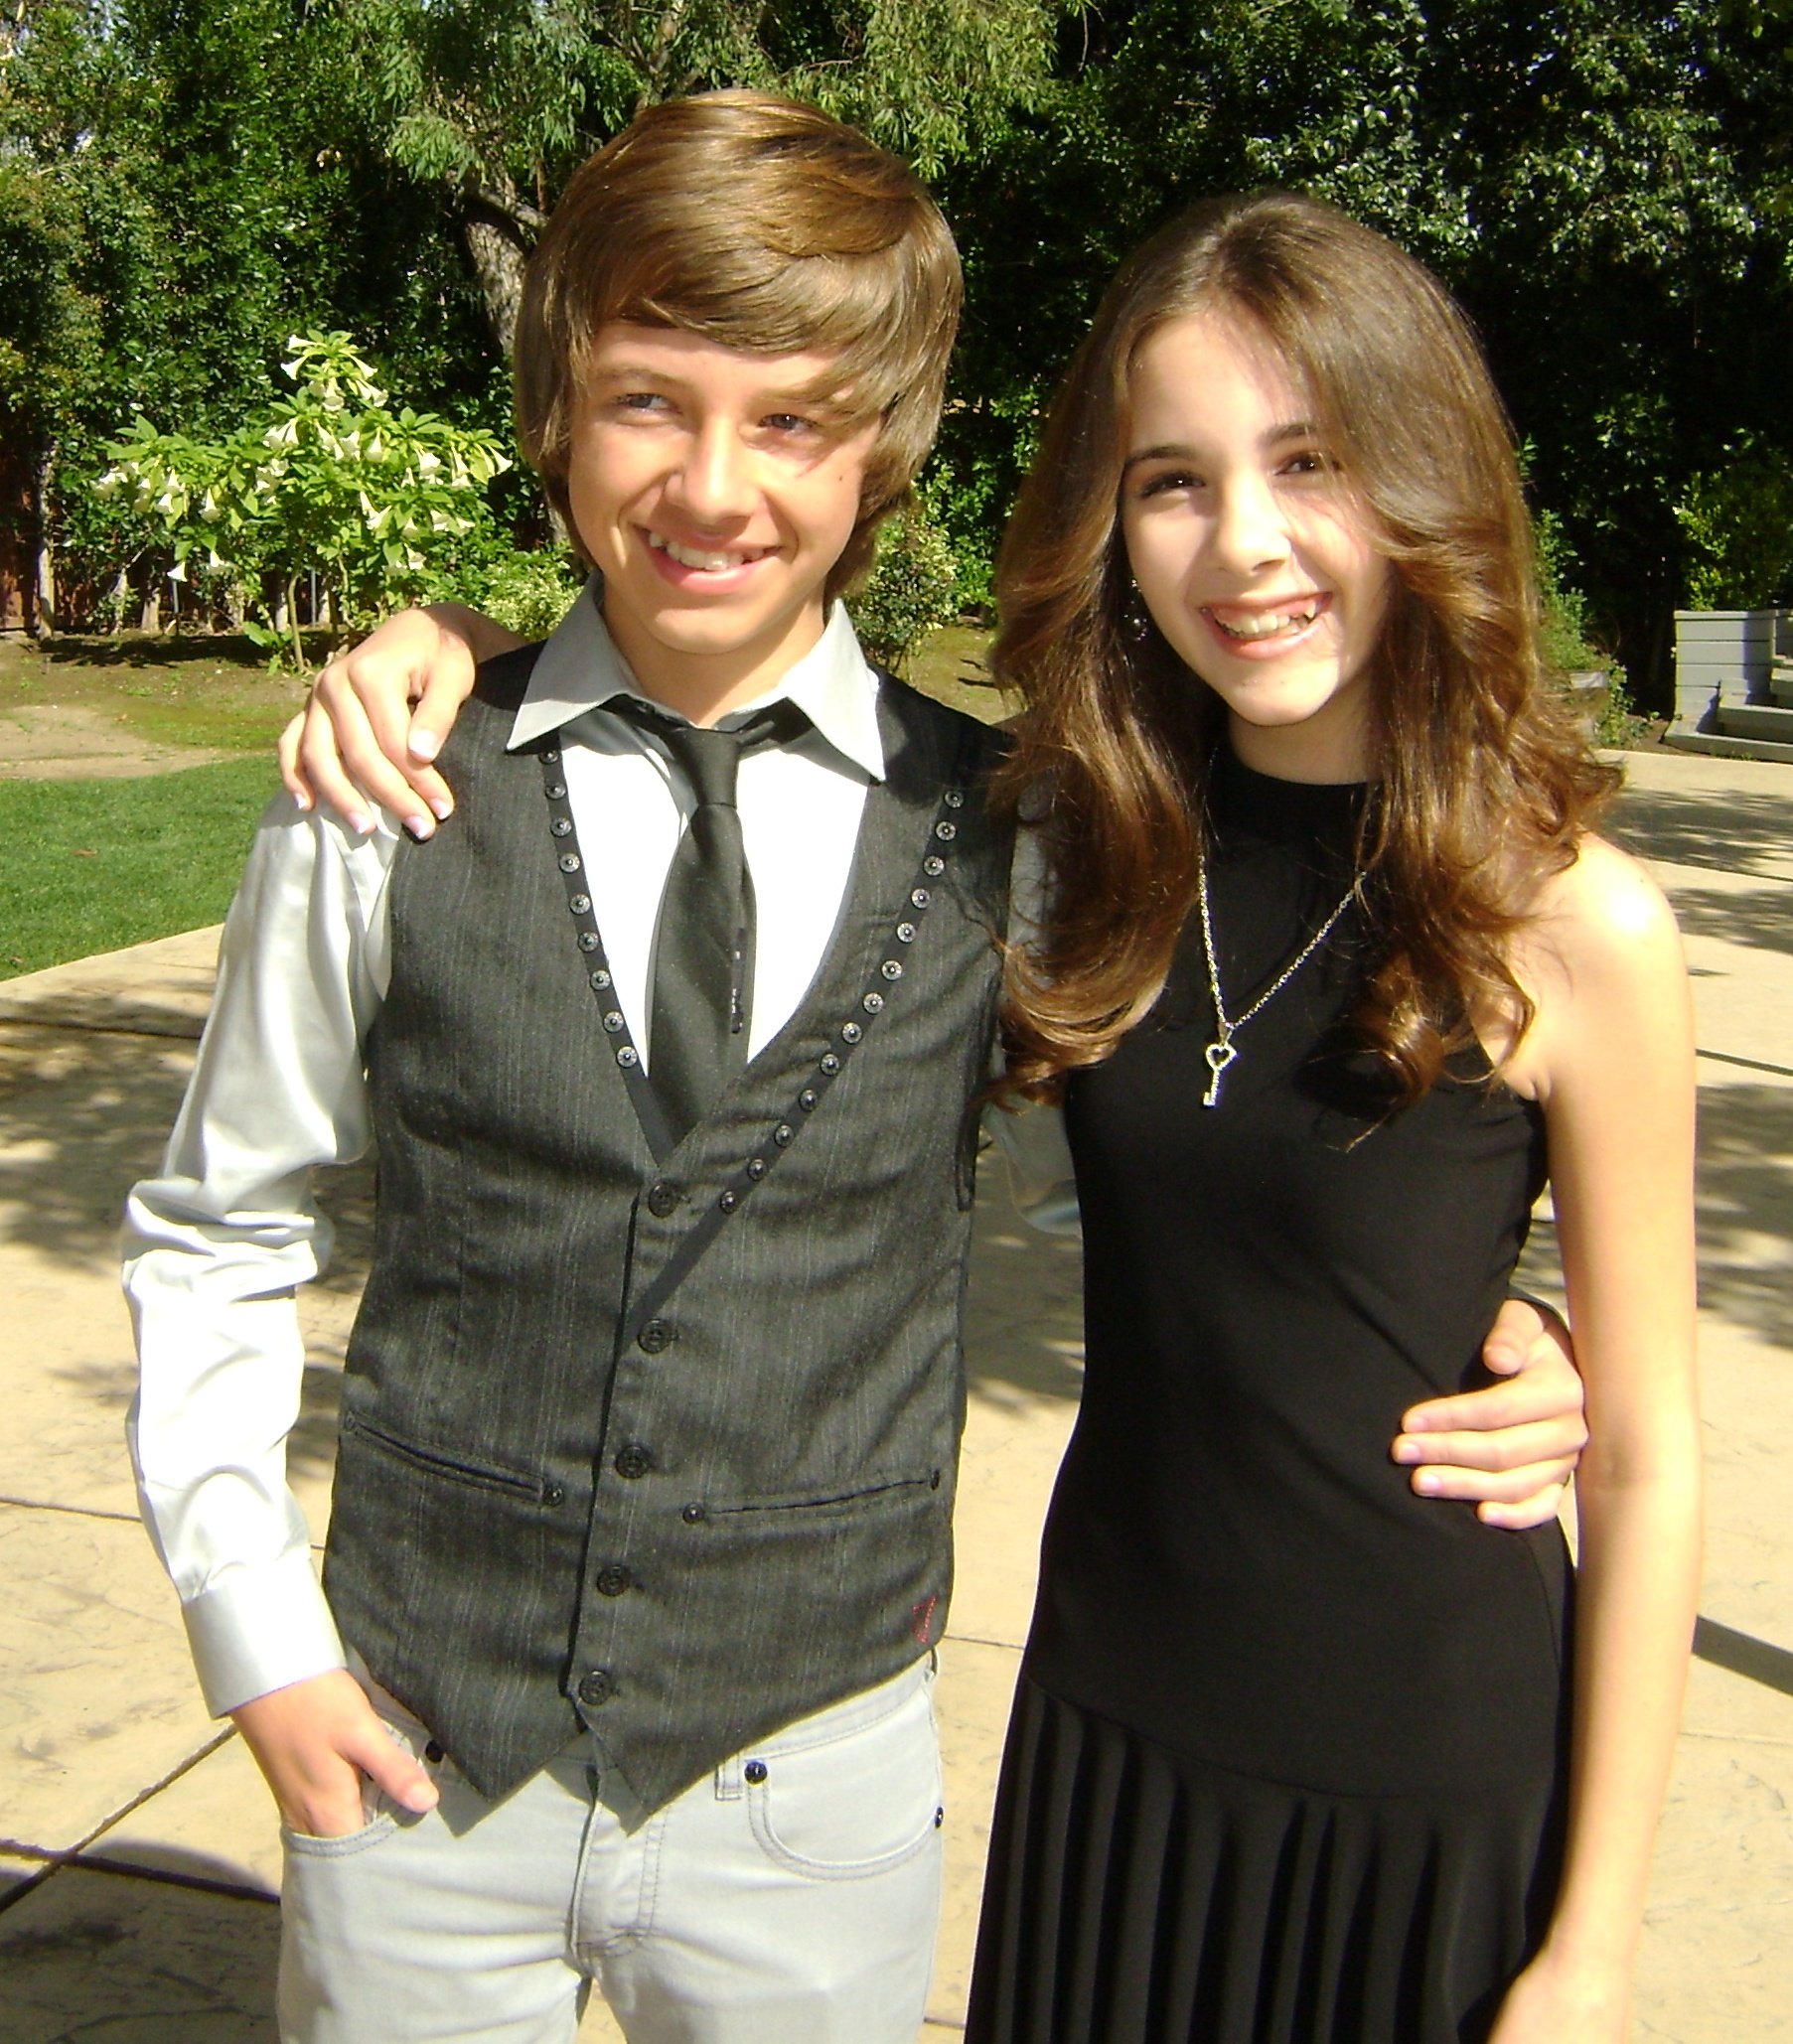 32nd Annual Young Artists Awards - Austin and Haley Pullos (House MD Guest Stars)